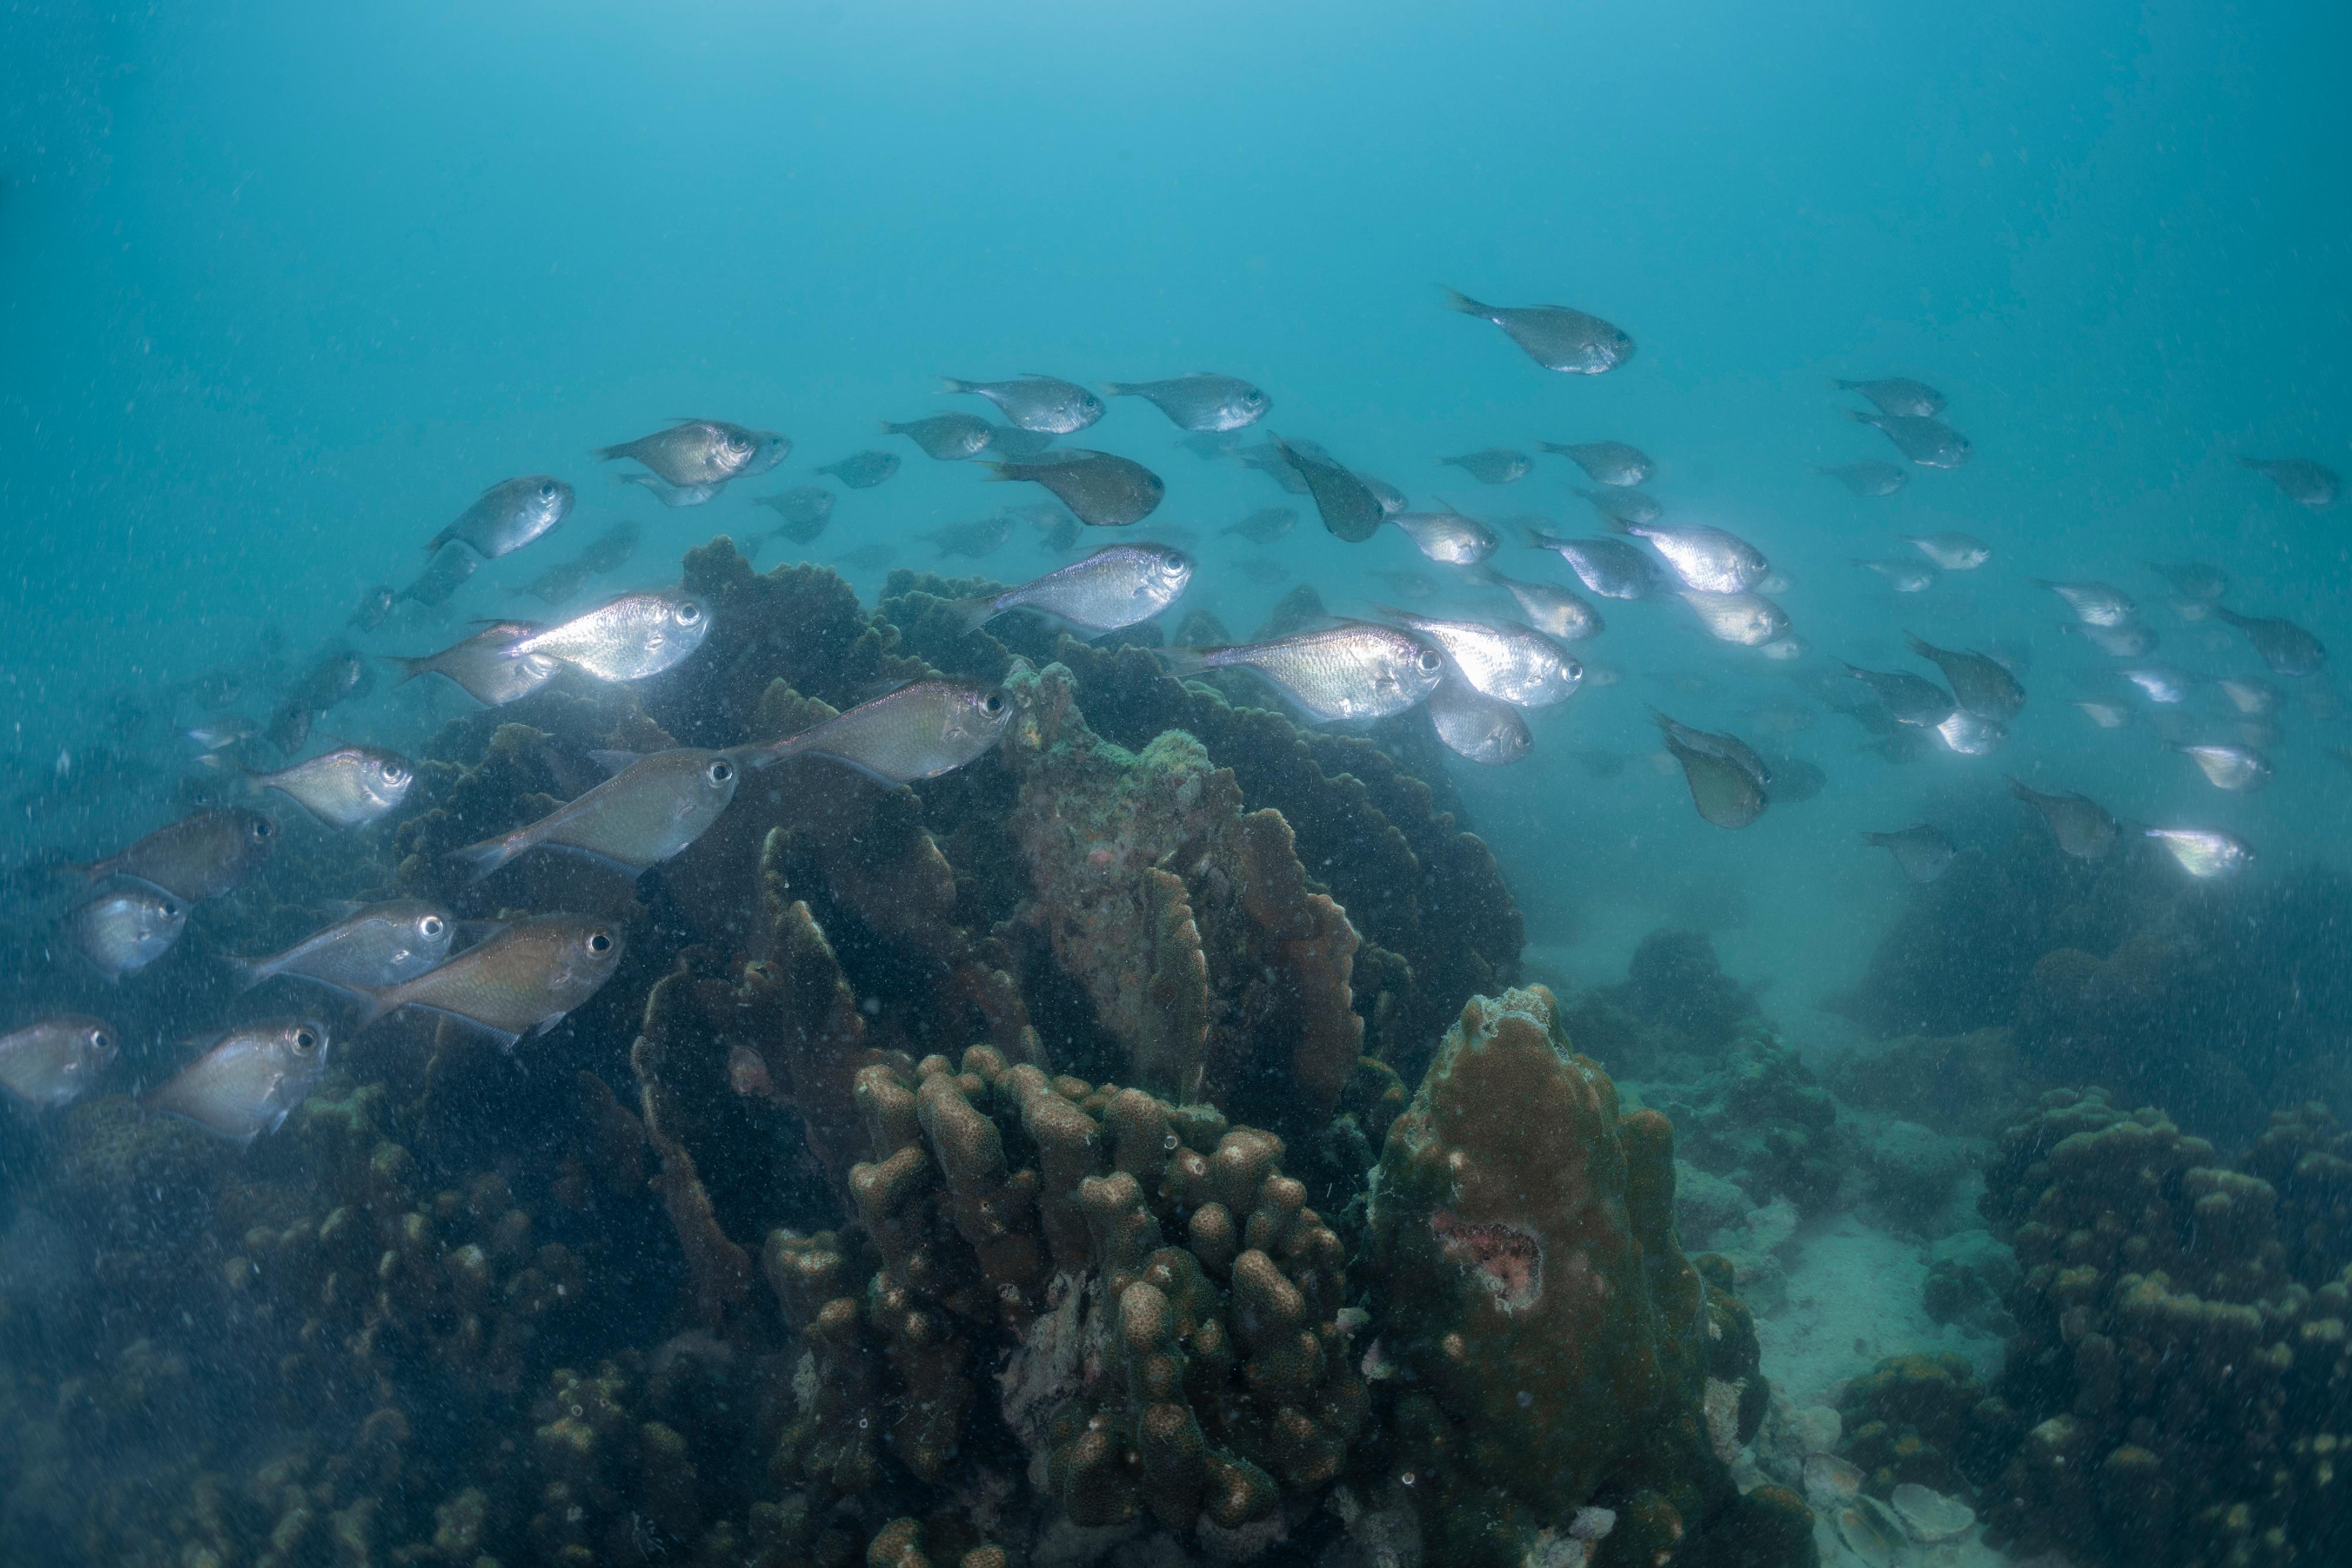 The Agriculture, Fisheries and Conservation Department announced today (December 11) that the Reef Check this year showed that local corals are generally in a healthy and stable condition and that the species diversity remains on the high side. Photo shows a school of silver sweepers at Tung Ping Chau.